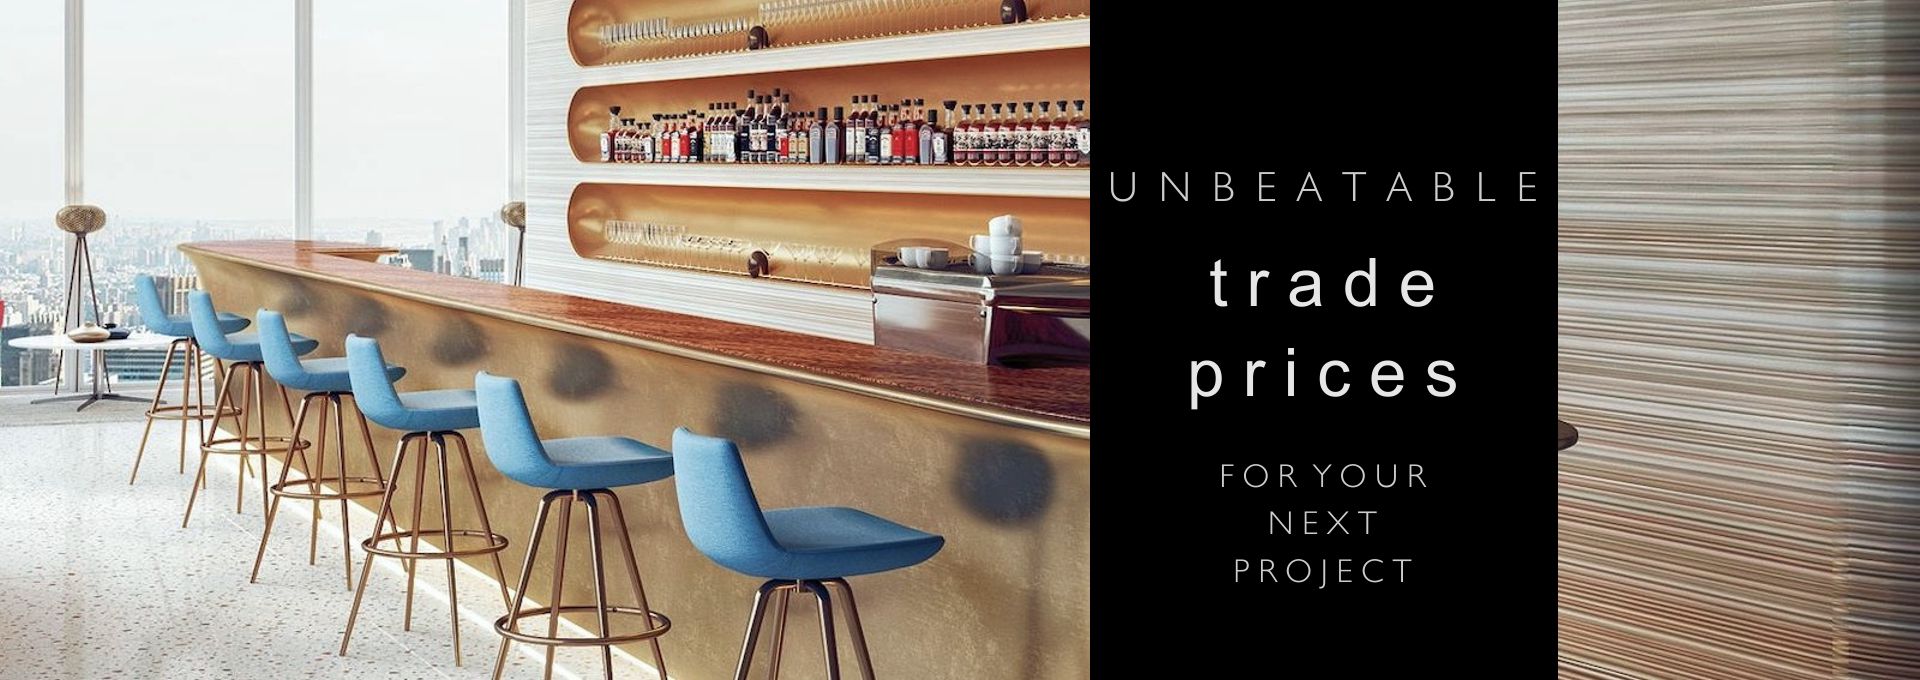 Unbeatable Trade Prices for your next project.